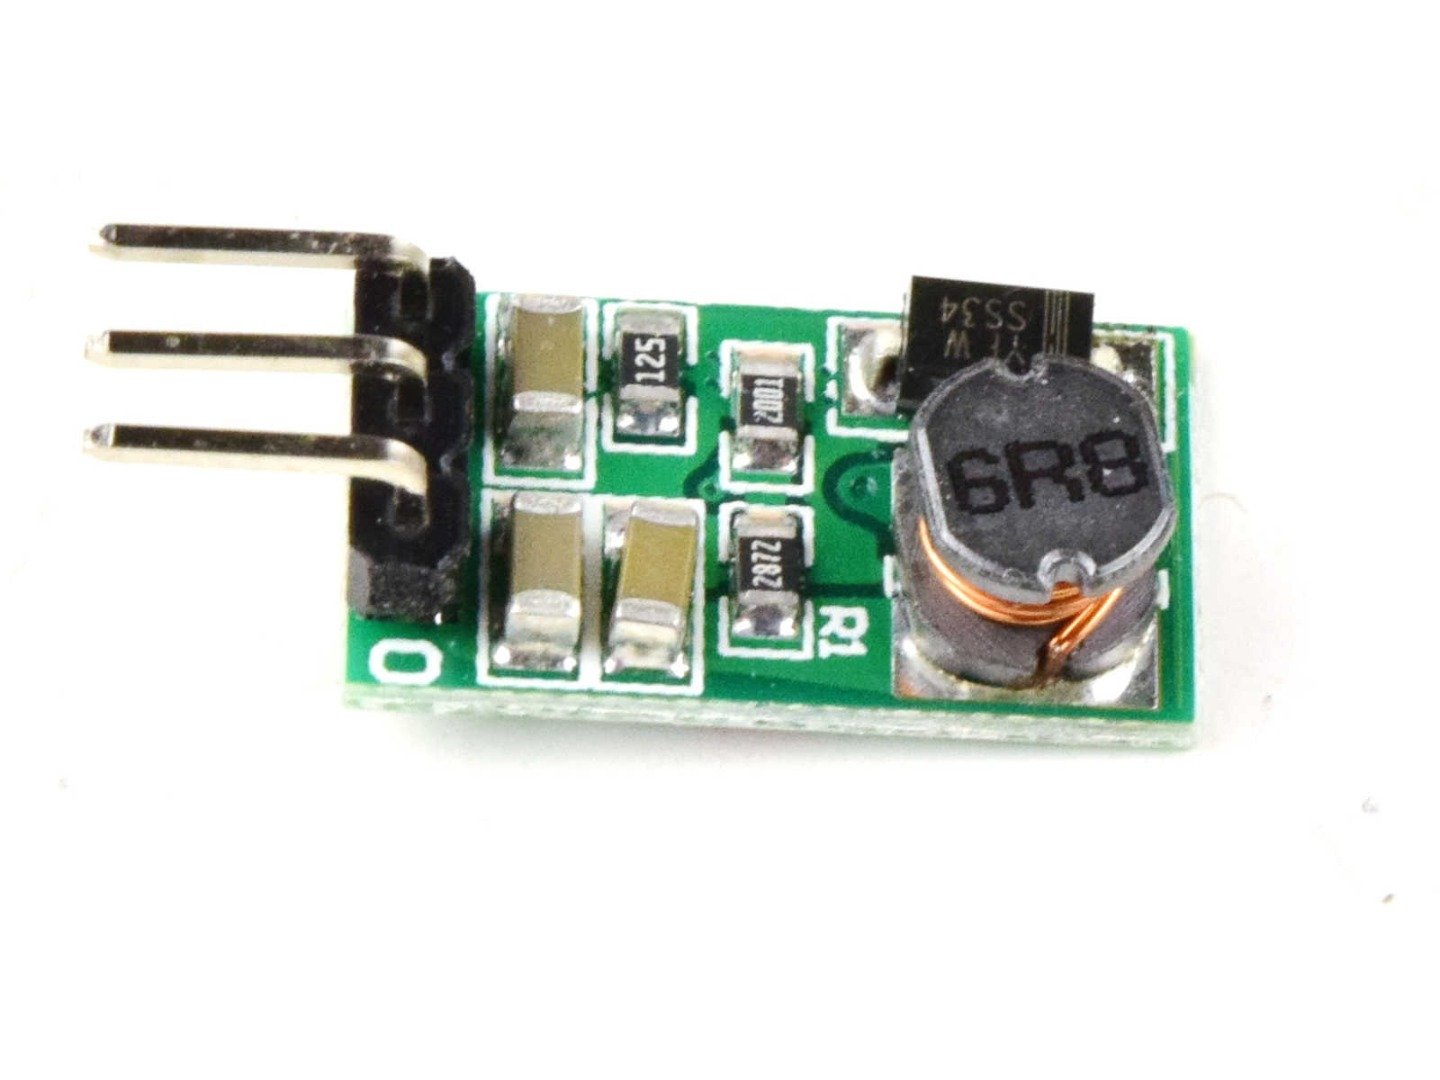 DC-DC Switching Regulator 12V 0.5A – TO-220 pinout – 7812 Replacement 8